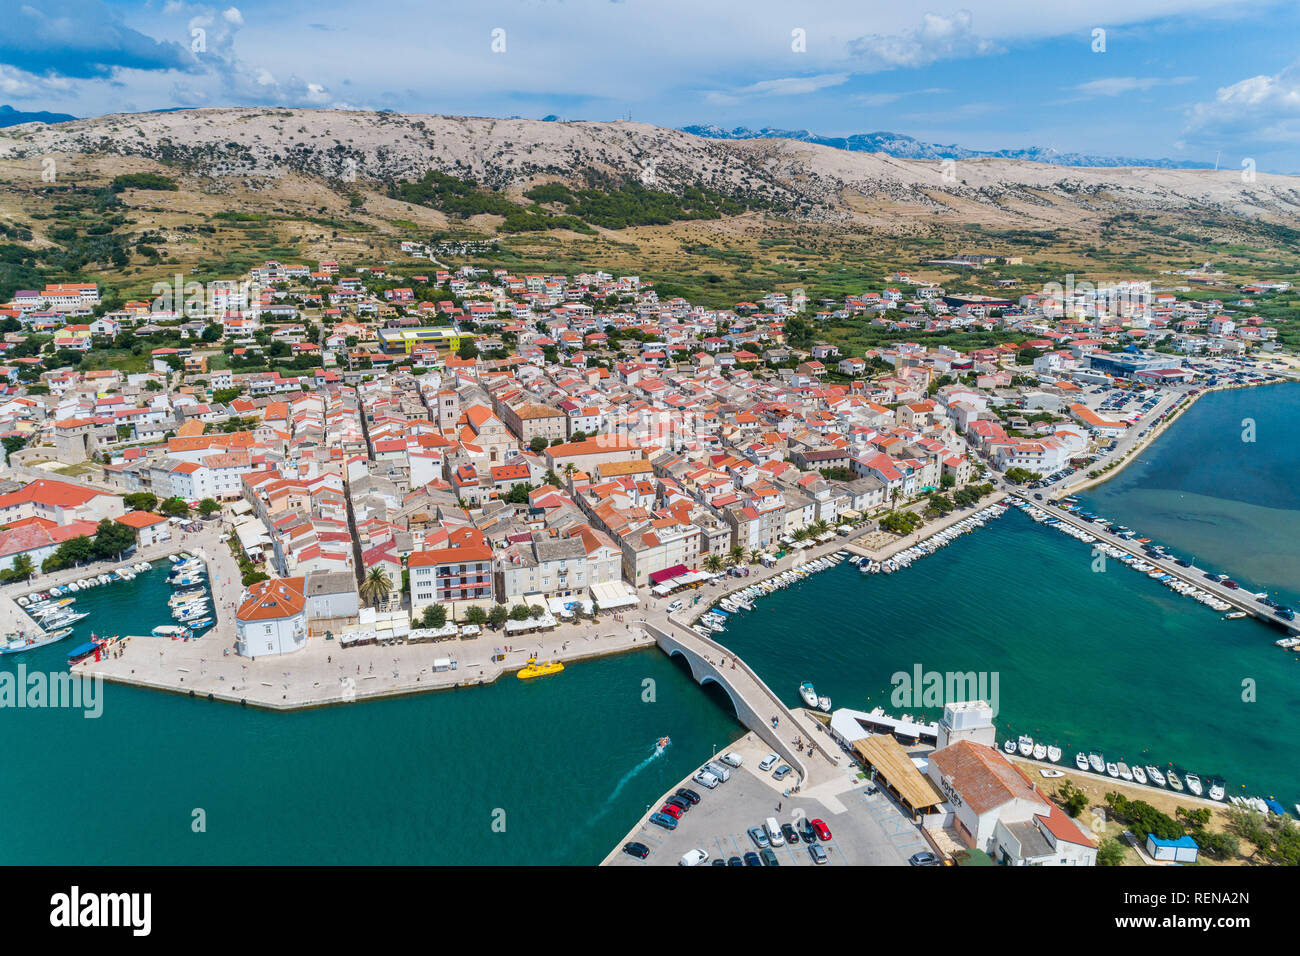 Stadt Pag, Insel Pag, Kroatien Stockfoto